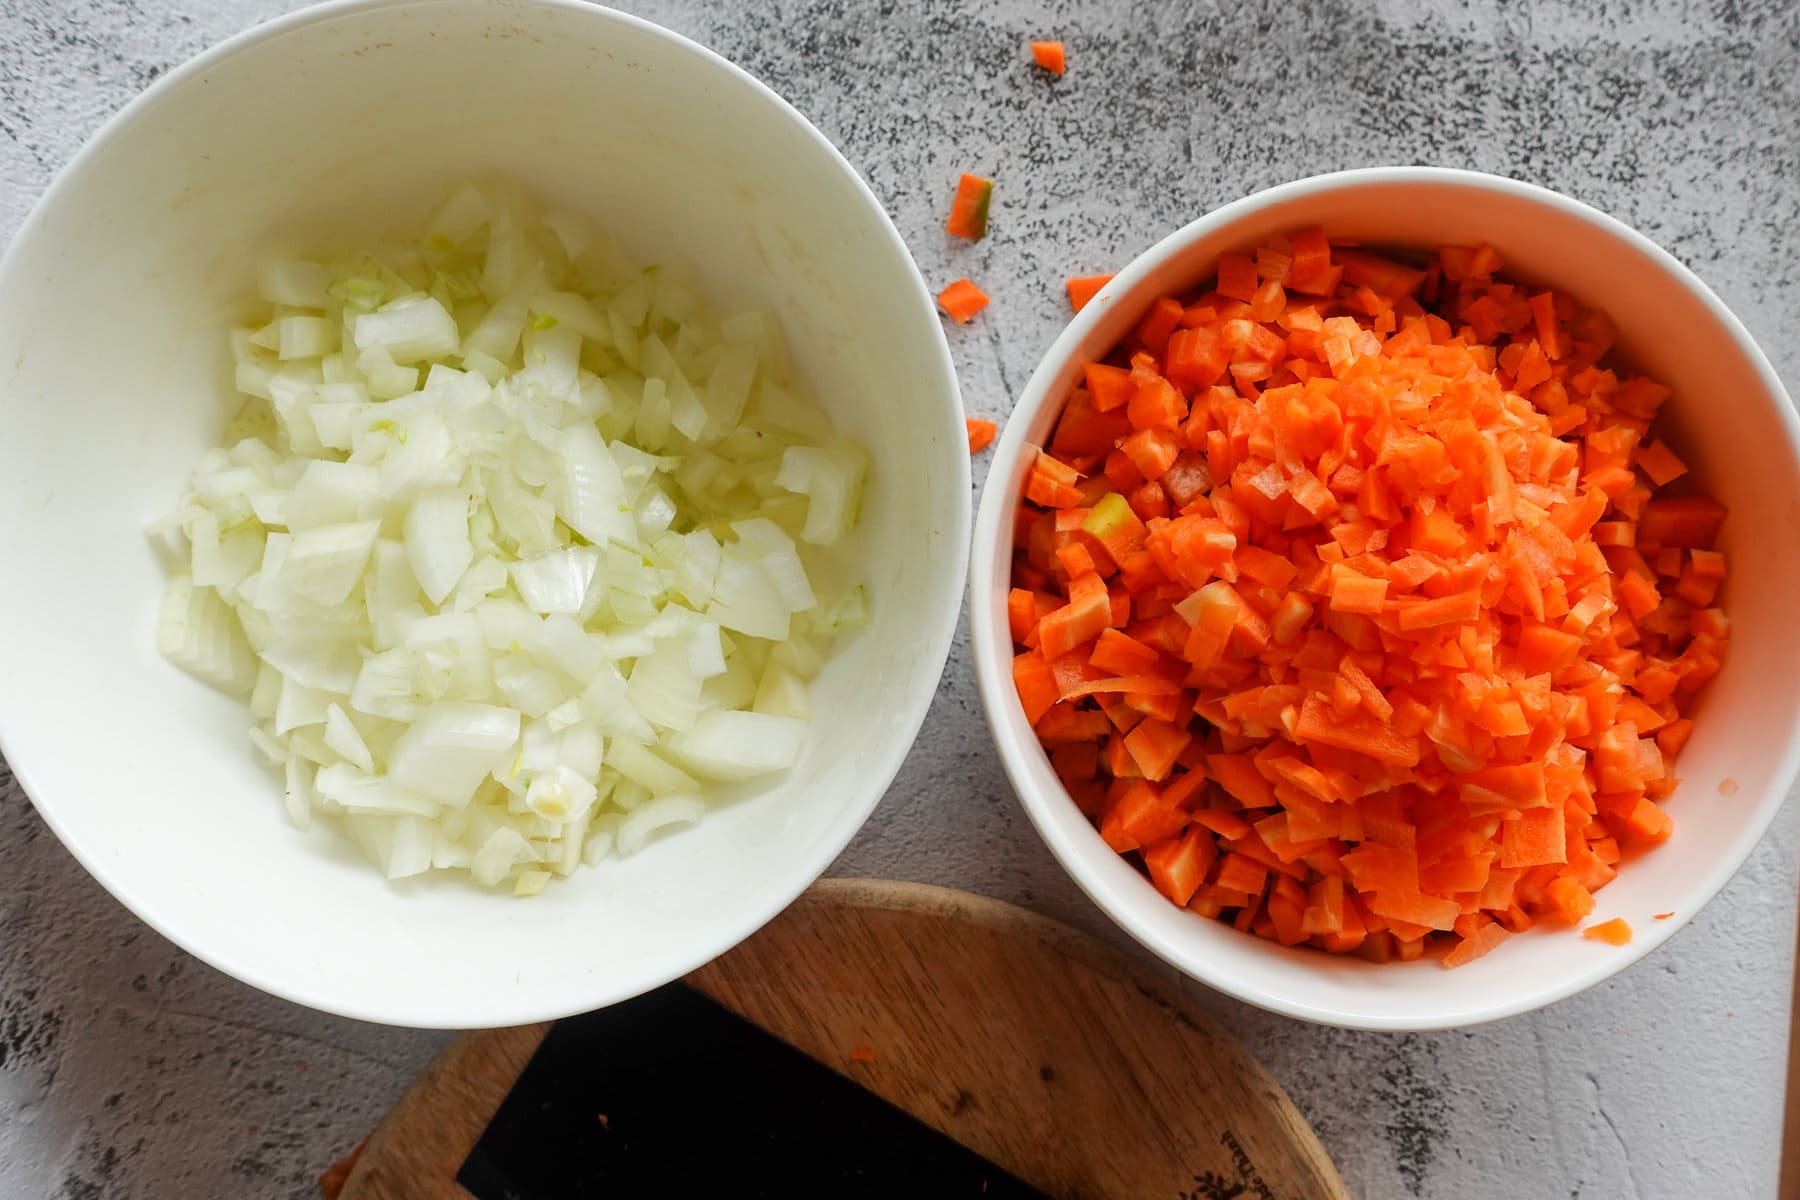 Chop onion and carrot